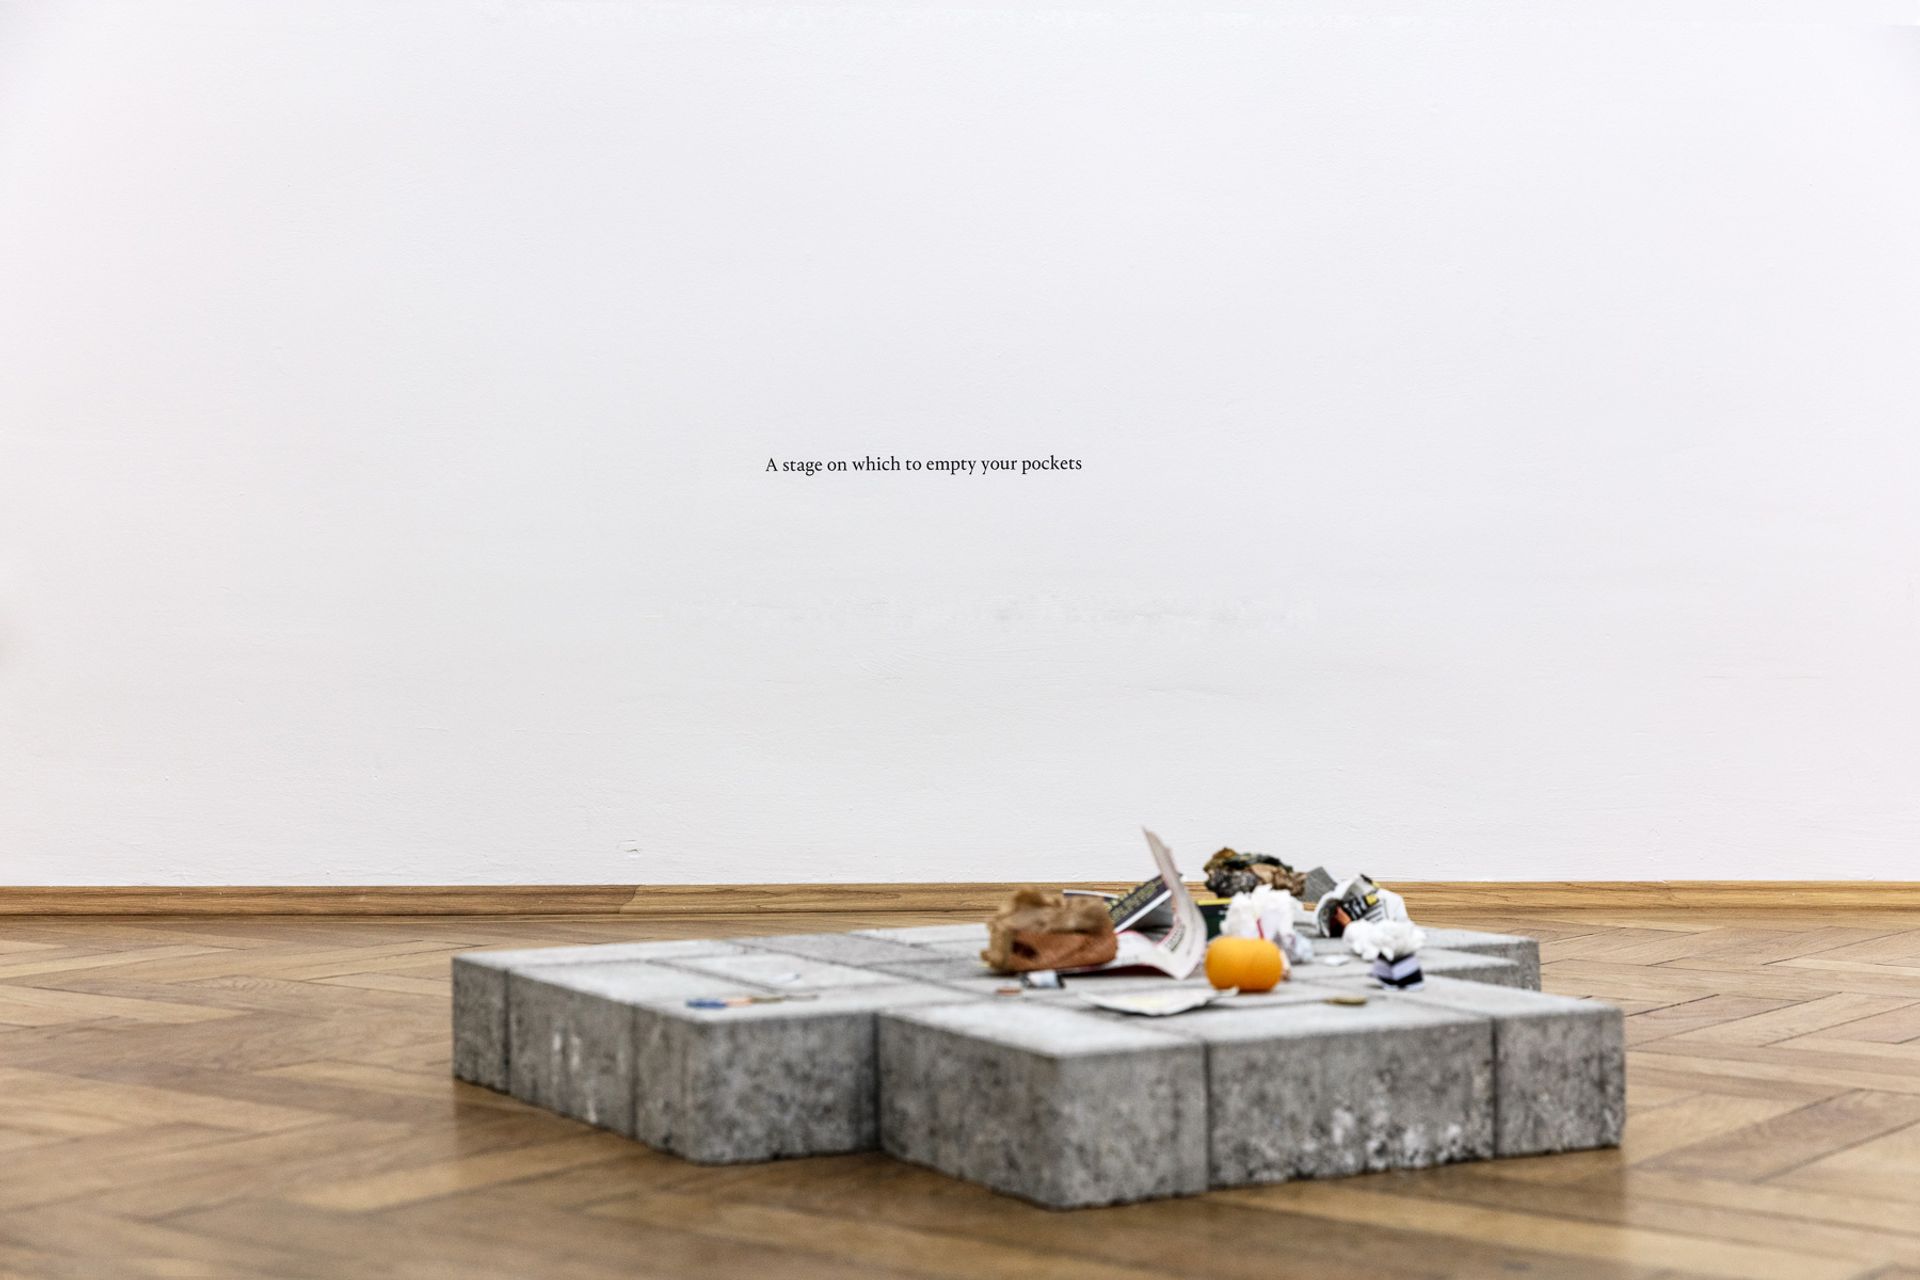 Thomas Geiger, A stage on which to empty your pockets, 2017, concrete paving stones, adhesive letters, 60 × 70 × 8 cm